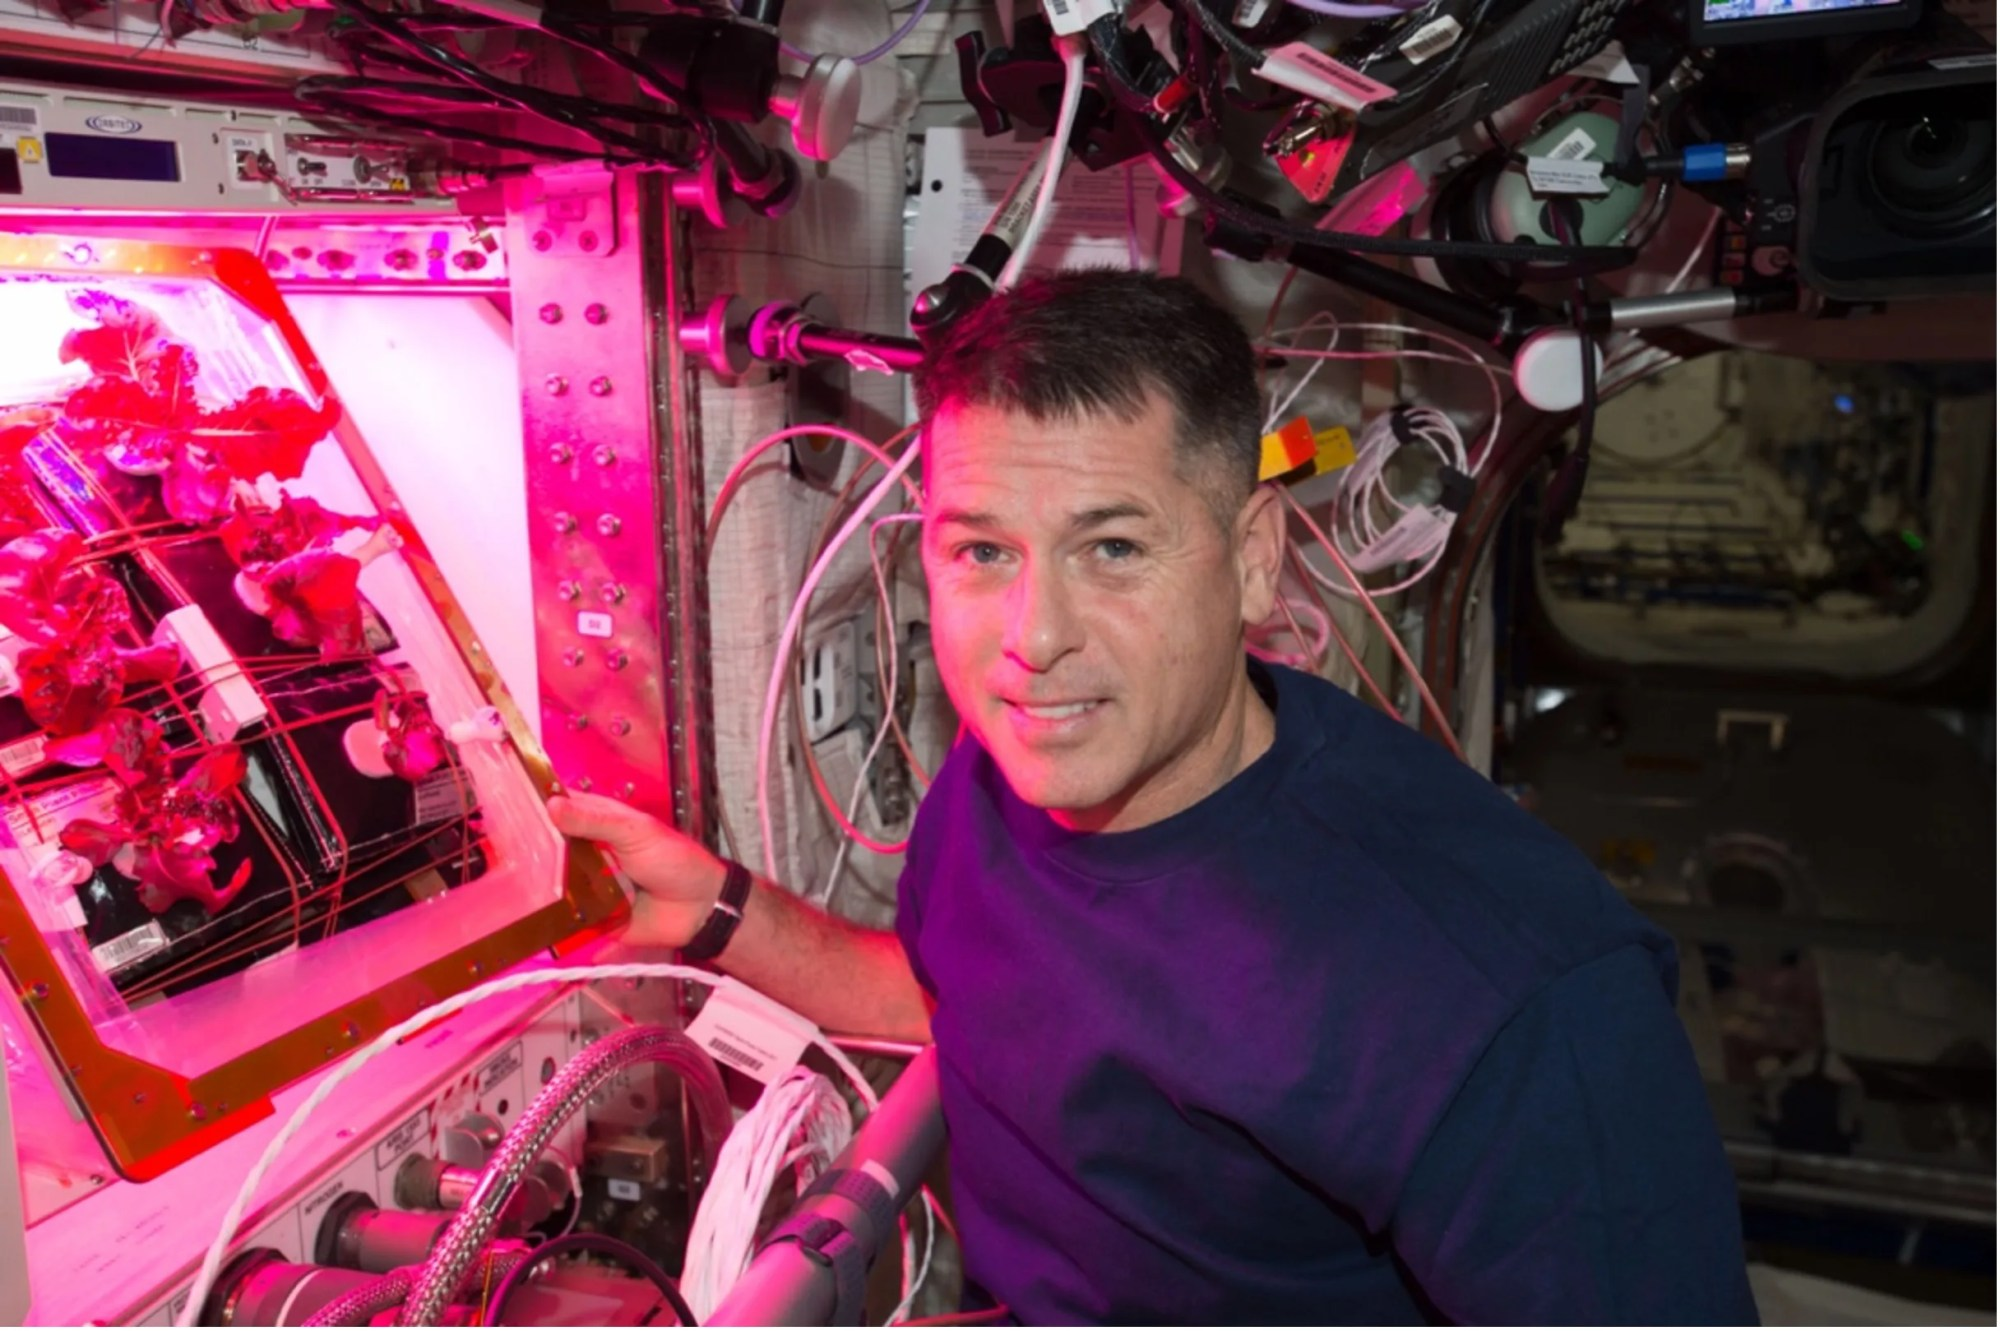 Astronaut in the International Space Station illuminated by fuchsia light emanating from a plant chamber growth device on the left-hand side. The device is box-shaped with two rows of three black